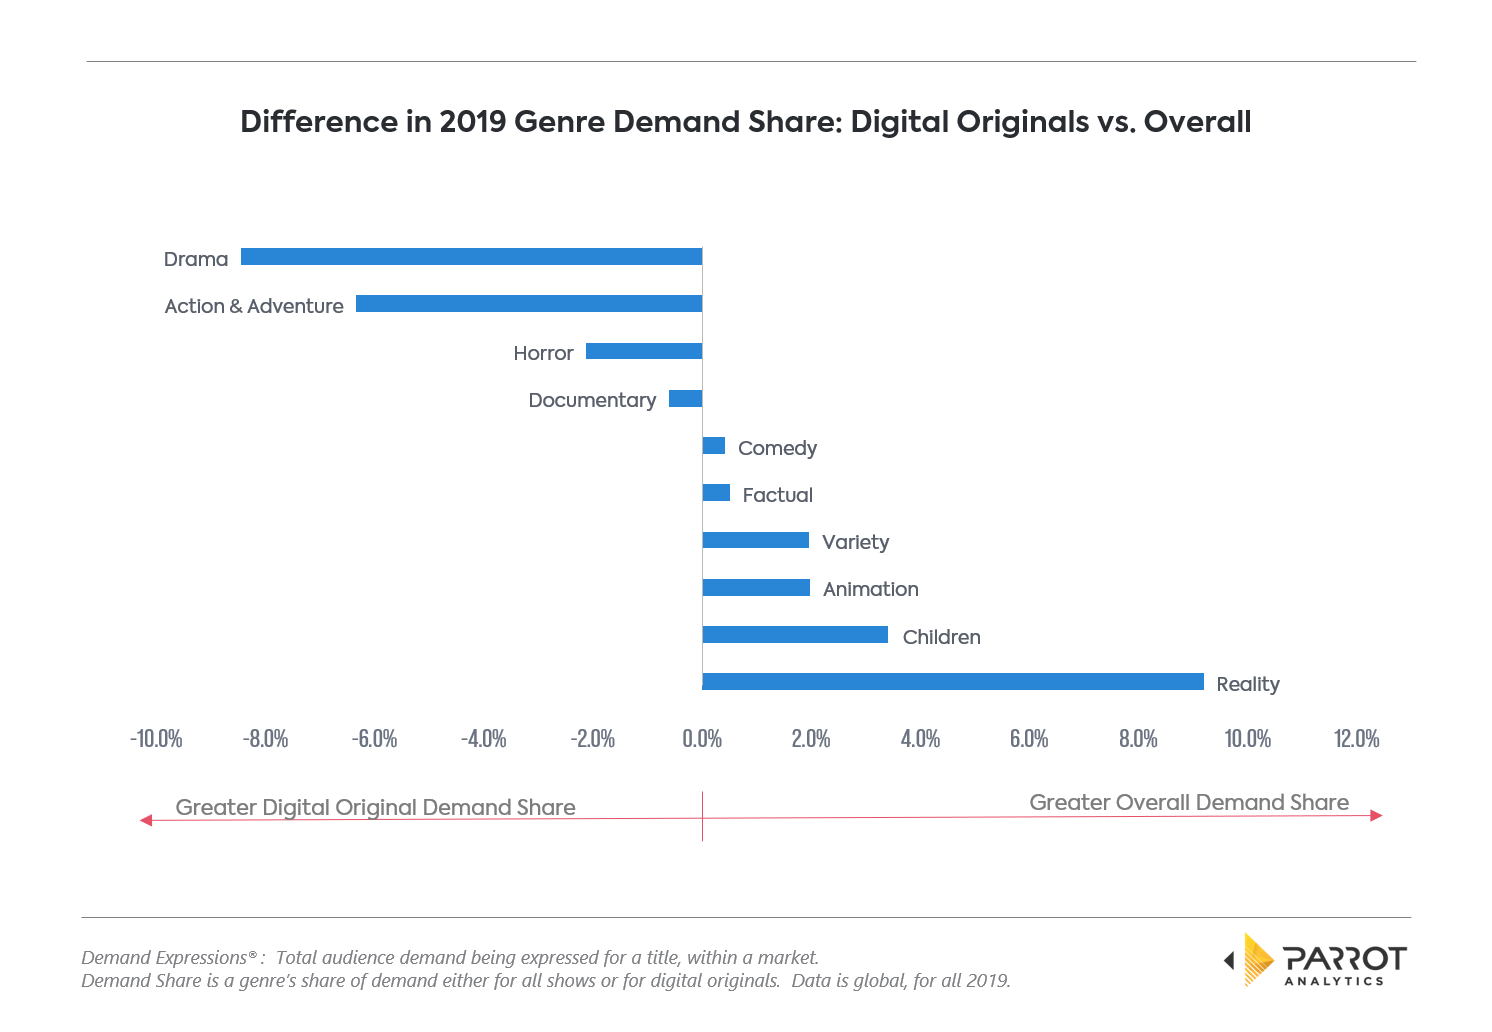 DO_vs_overall_genre_demand_share.png